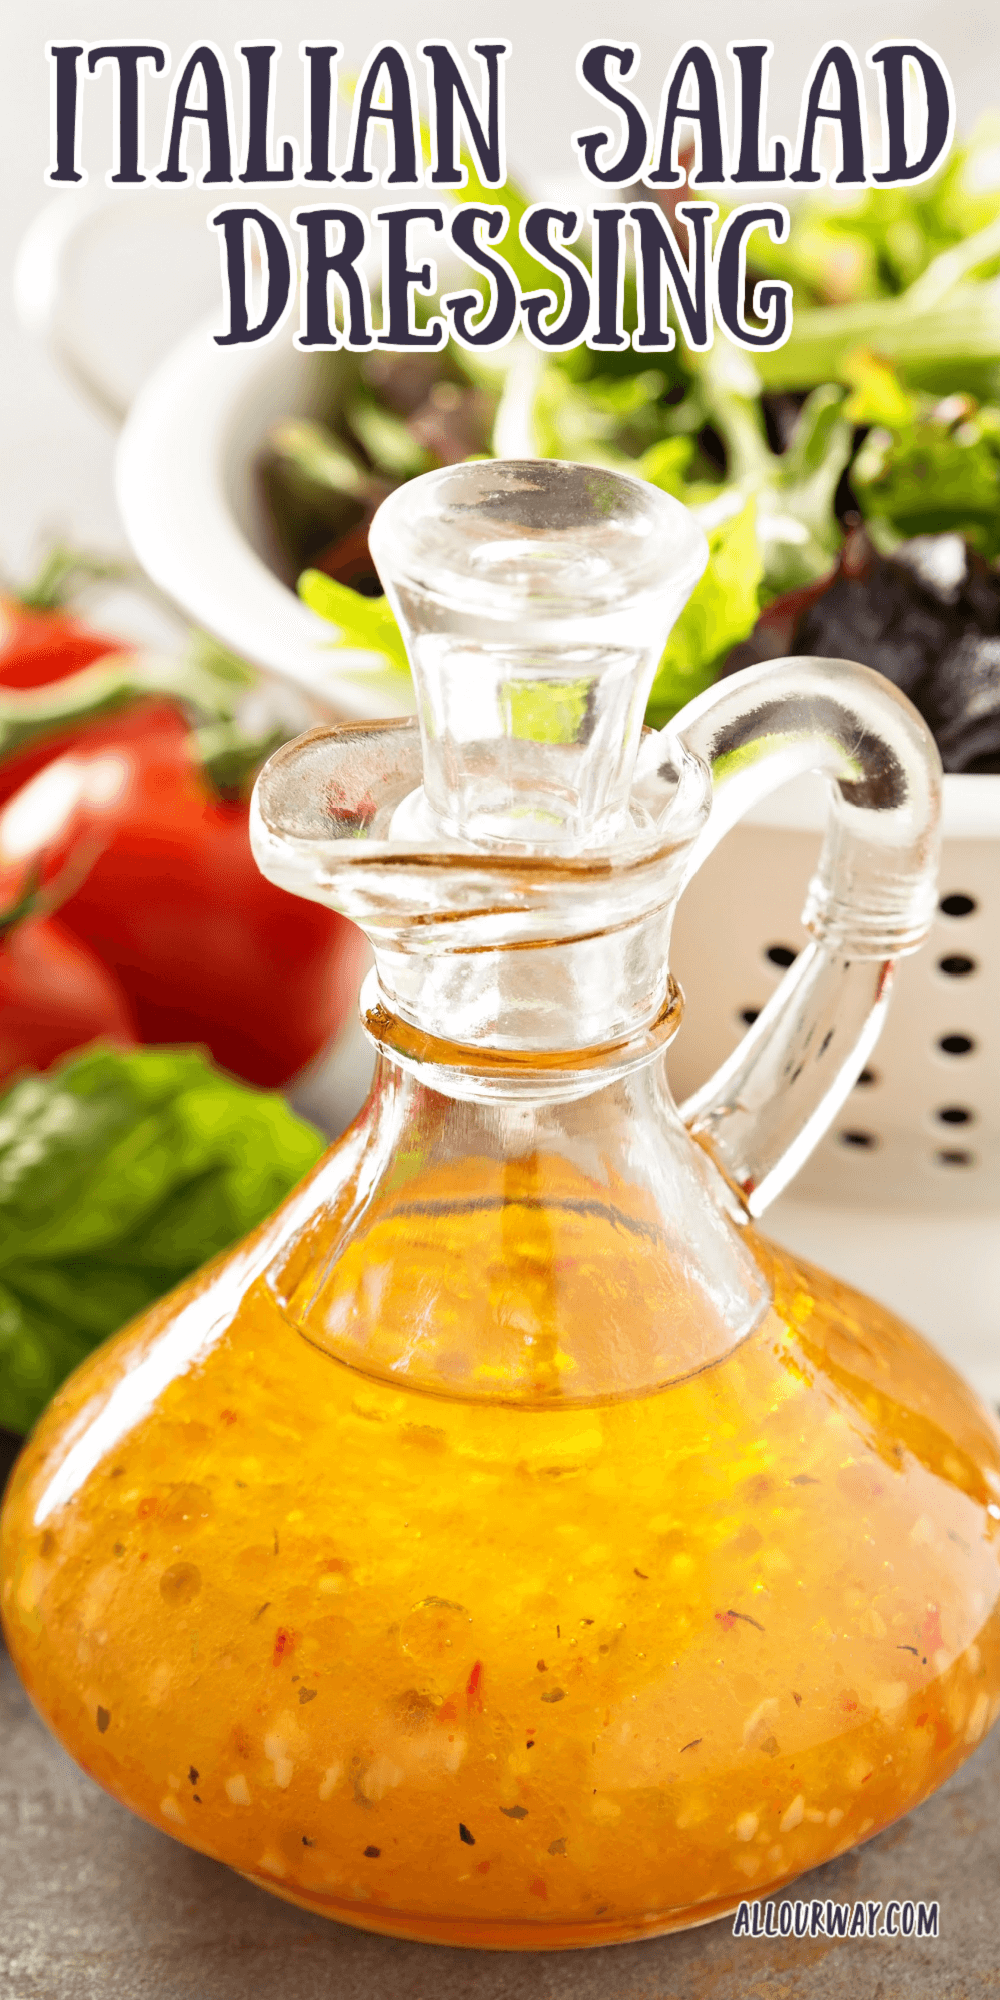 Forget the slimy store bought Italian dressing, this dressing tastes fresher and better than Olive Gardens famous salad dressing. It's easy to make plus it doesn't have to be refrigerated. Take the dressing on a picnic for your salads or put it on chicken and bake. An Italian dressing that you'll never tire of. #Italiansaladdressing #homemadesaladdressing #Olivegardendressing